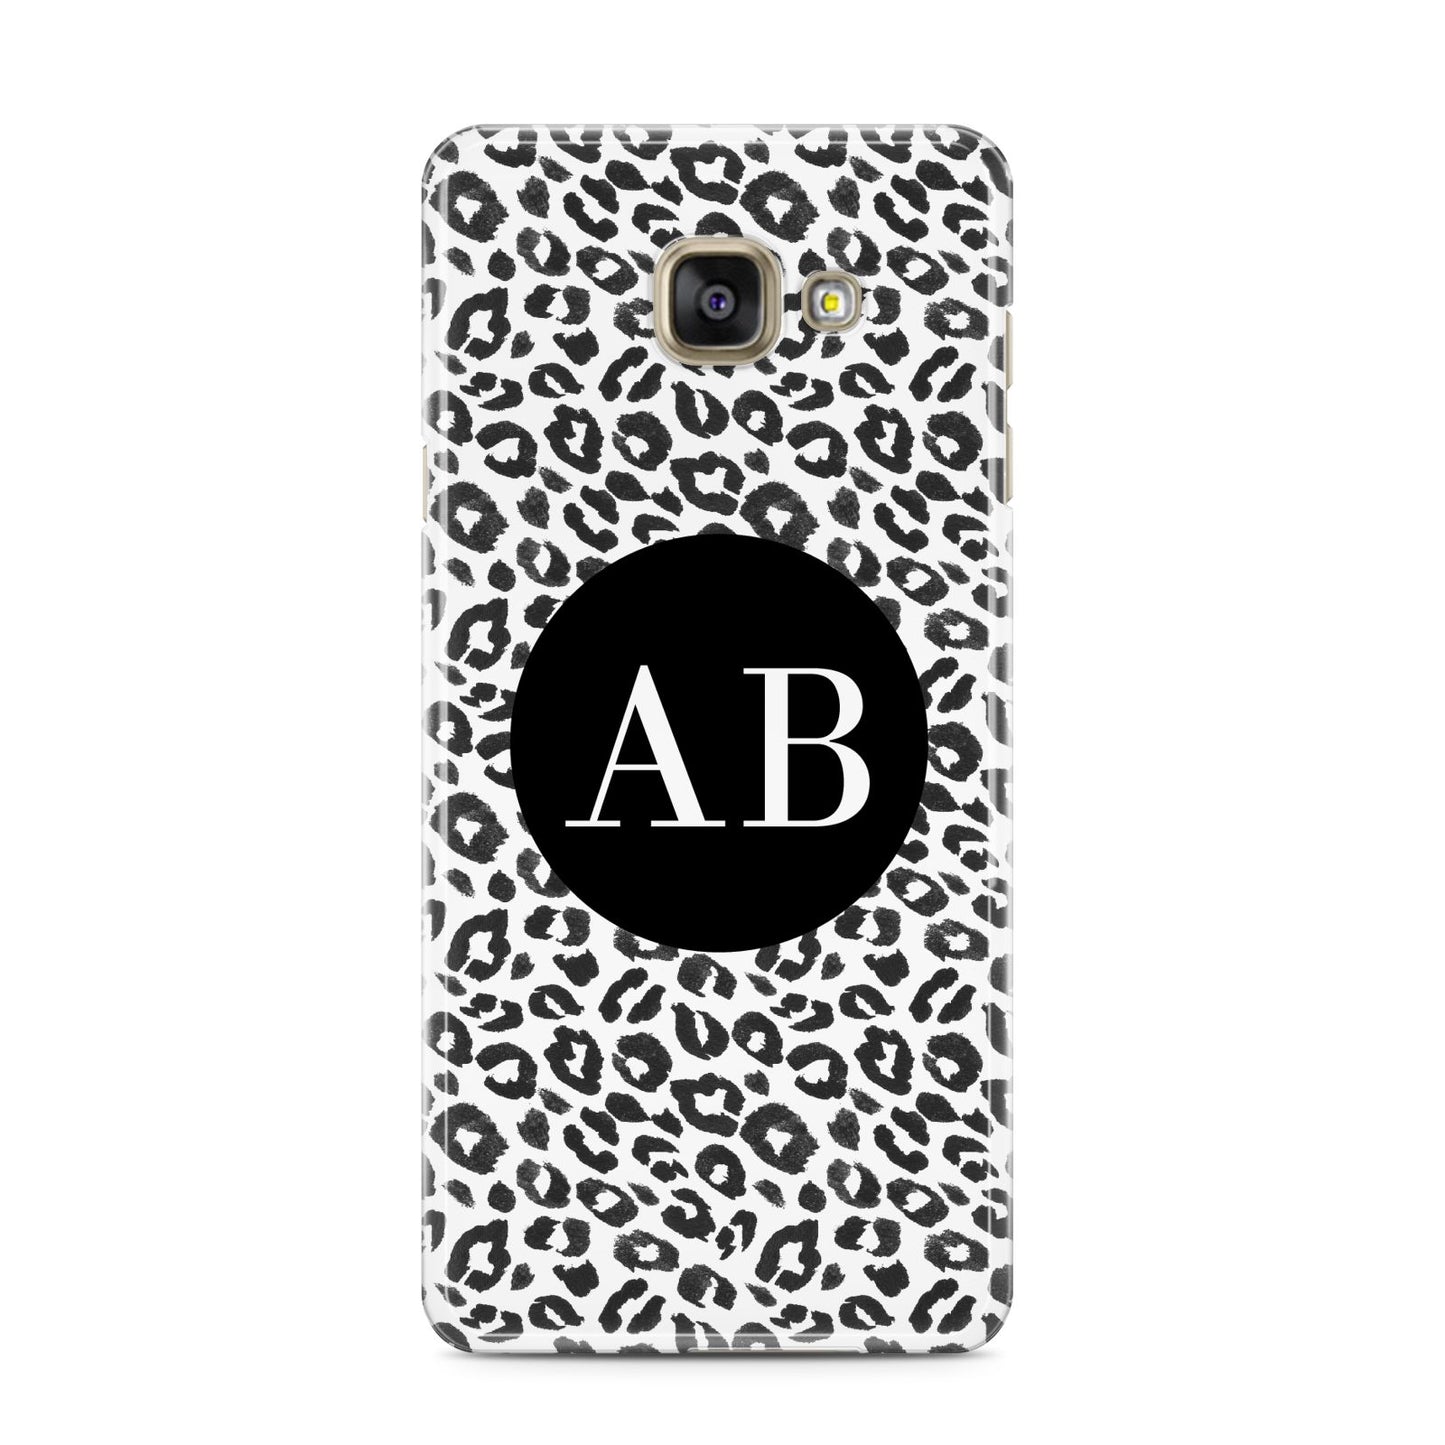 Leopard Print Black and White Samsung Galaxy A3 2016 Case on gold phone